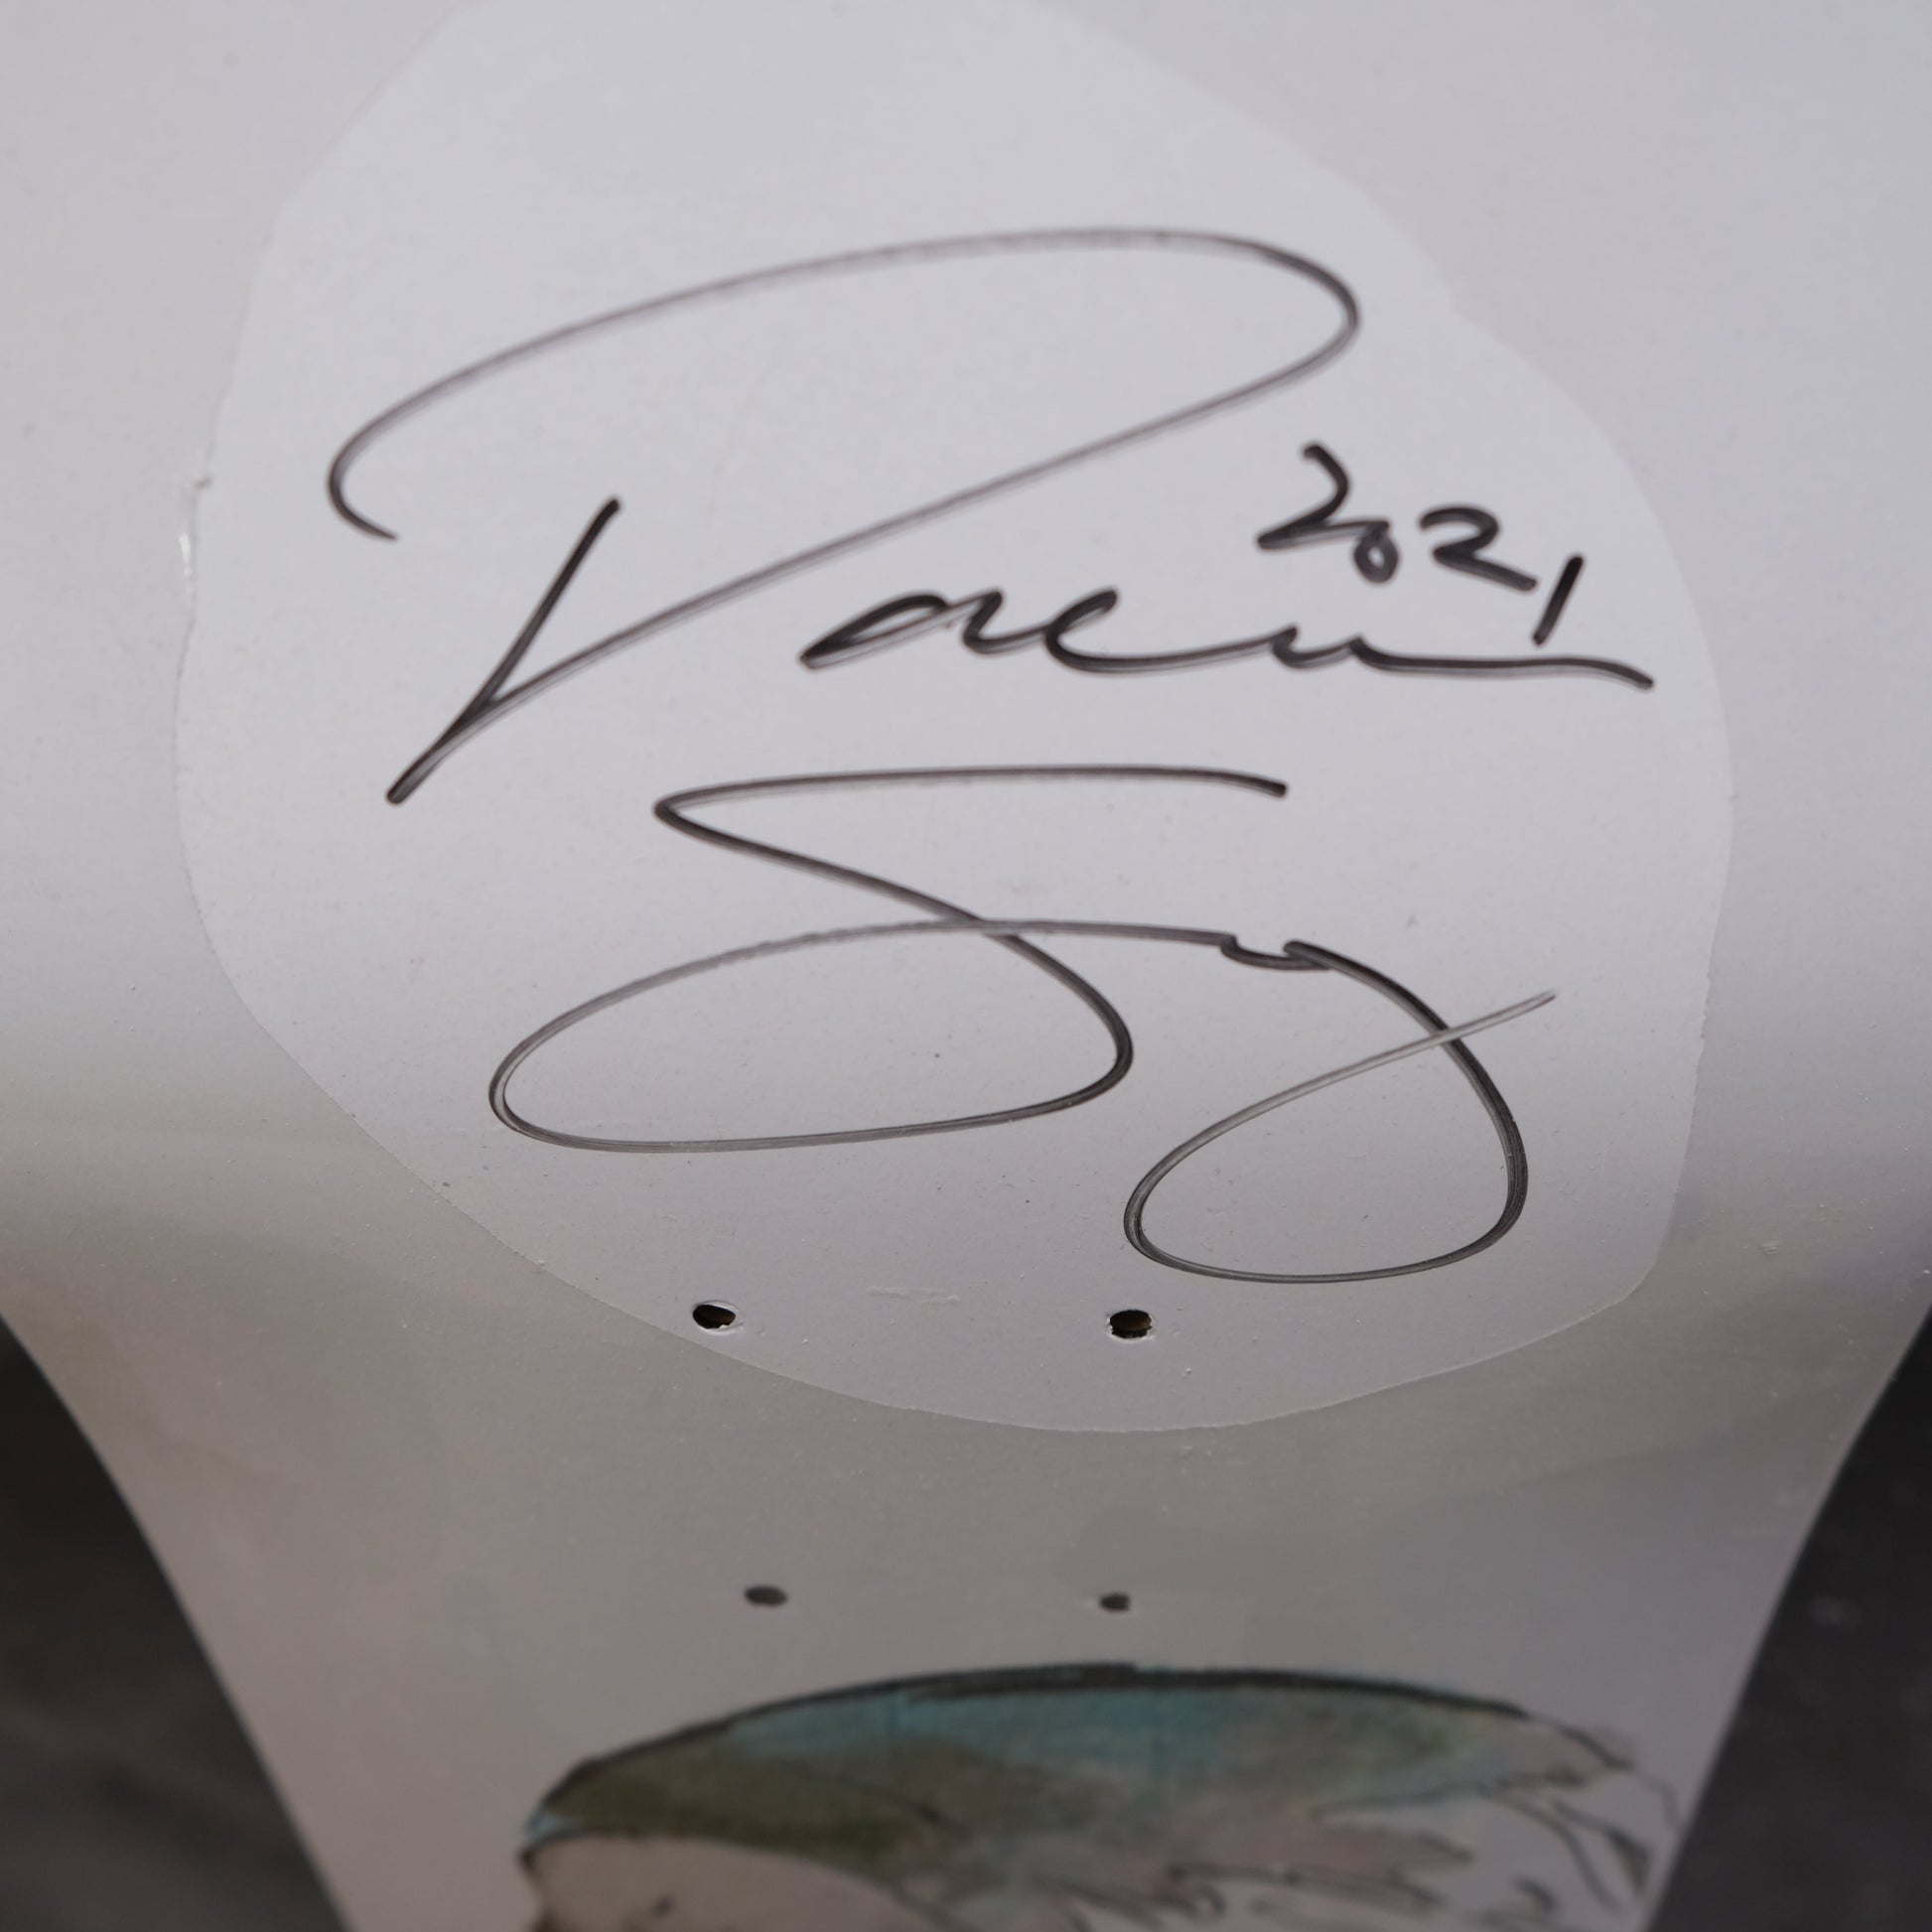 Thank You Daewon Song SIGNED Skateboard Deck 8.0 - Soul Performance Surf & Skate - THANK YOU